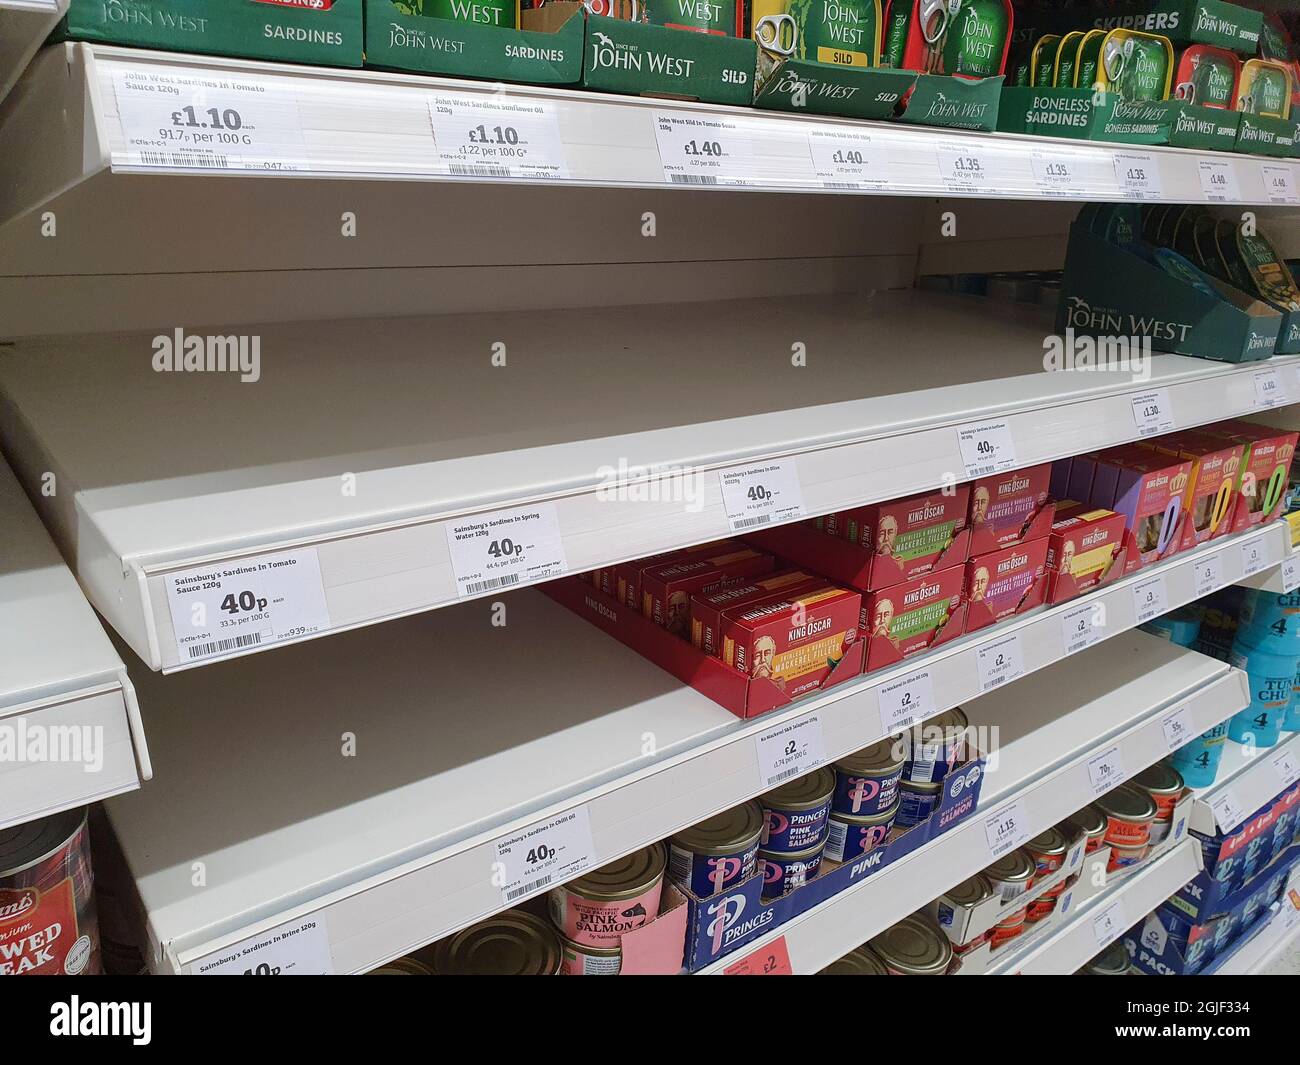 London, UK, 8 September 2021: While most supermarket shelves are fully stocked, problems with Brexit and a shortage of HGV drivers are leading to sme erratic supplies. In this instance, Sainsbury's in Balham has been unable to re-stock their own-brand tinned sardines leaving the shelf empty. Anna Watson/Alamy Live News Stock Photo